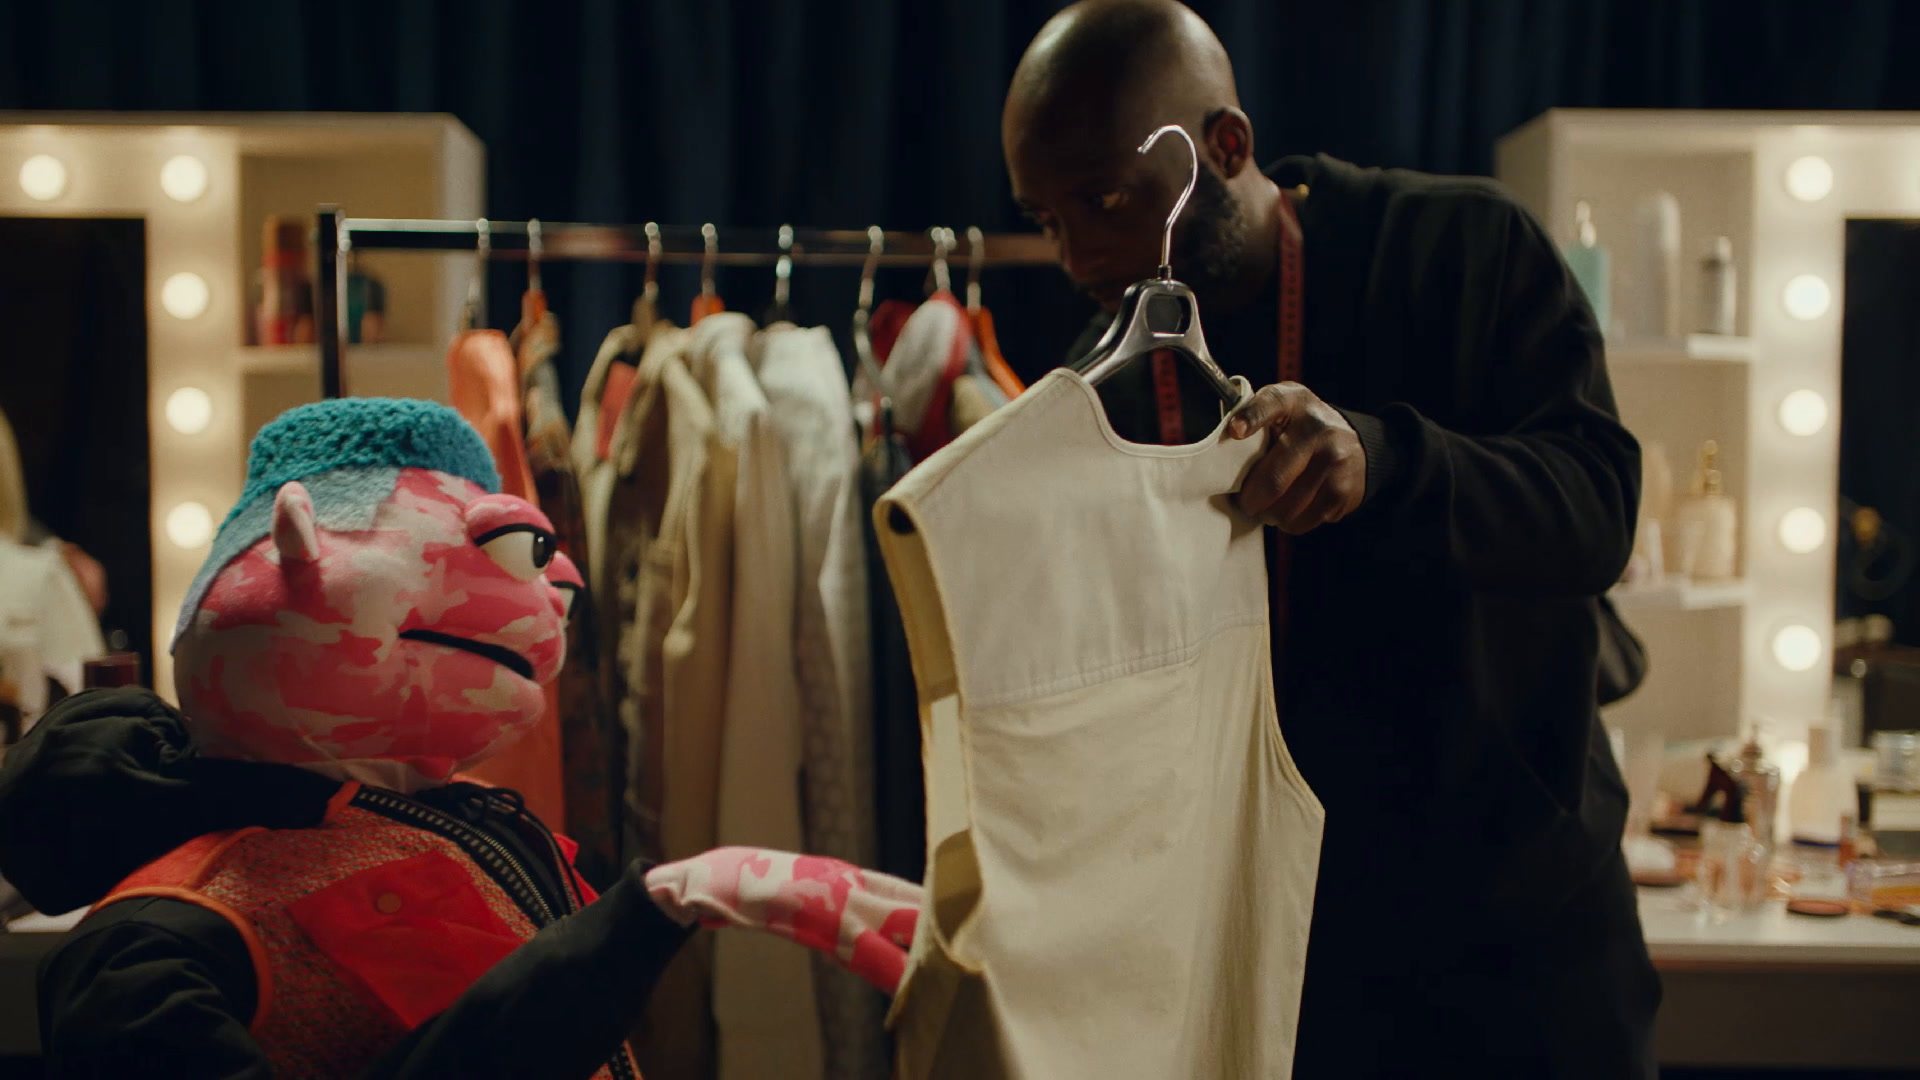 This Fashion Show Stars Puppets Made From Upcycled Clothes